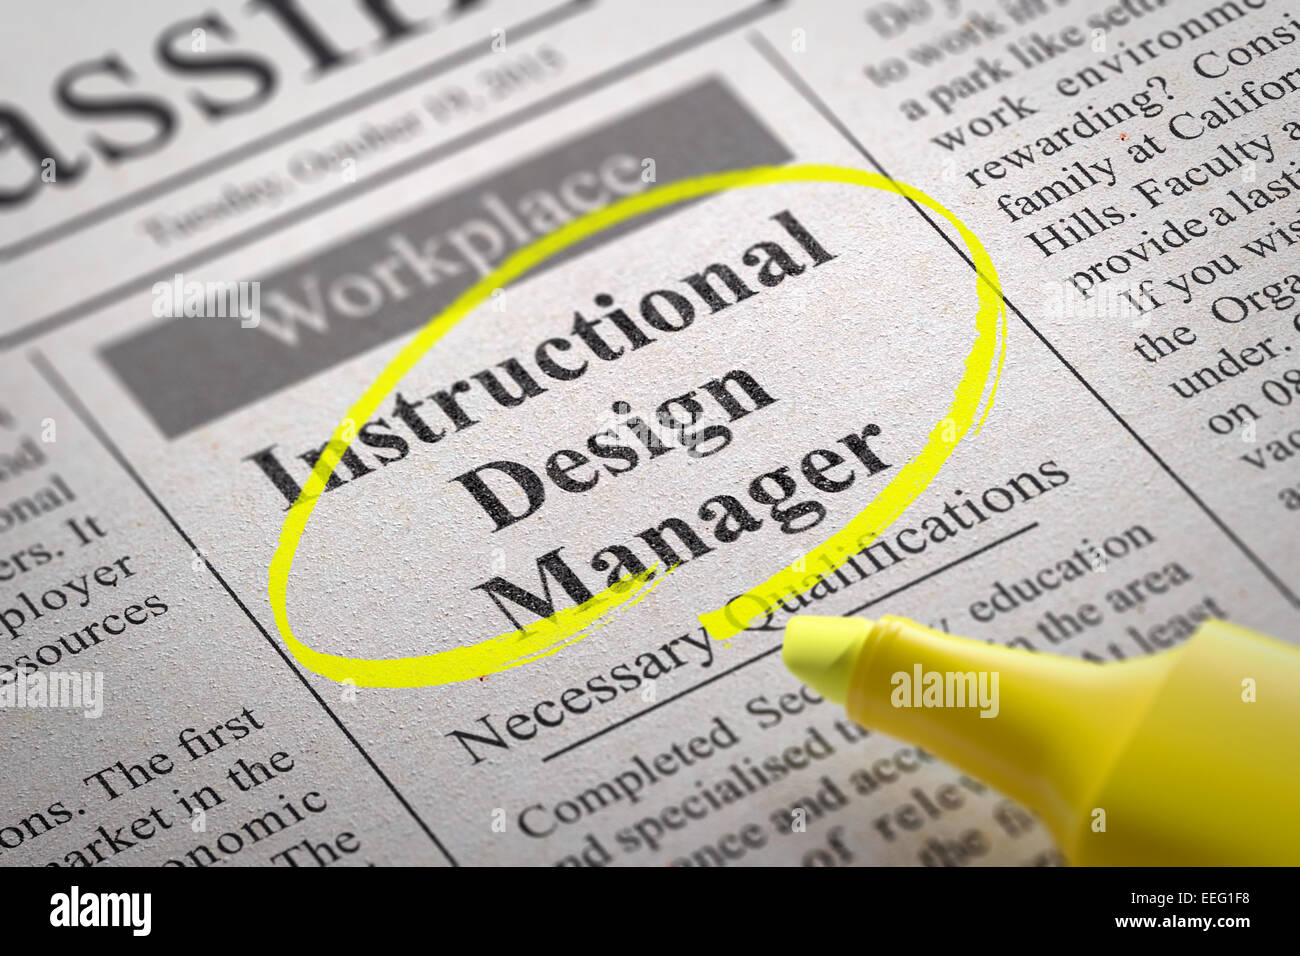 Instructional Design Manager Jobs in Newspaper. Stock Photo